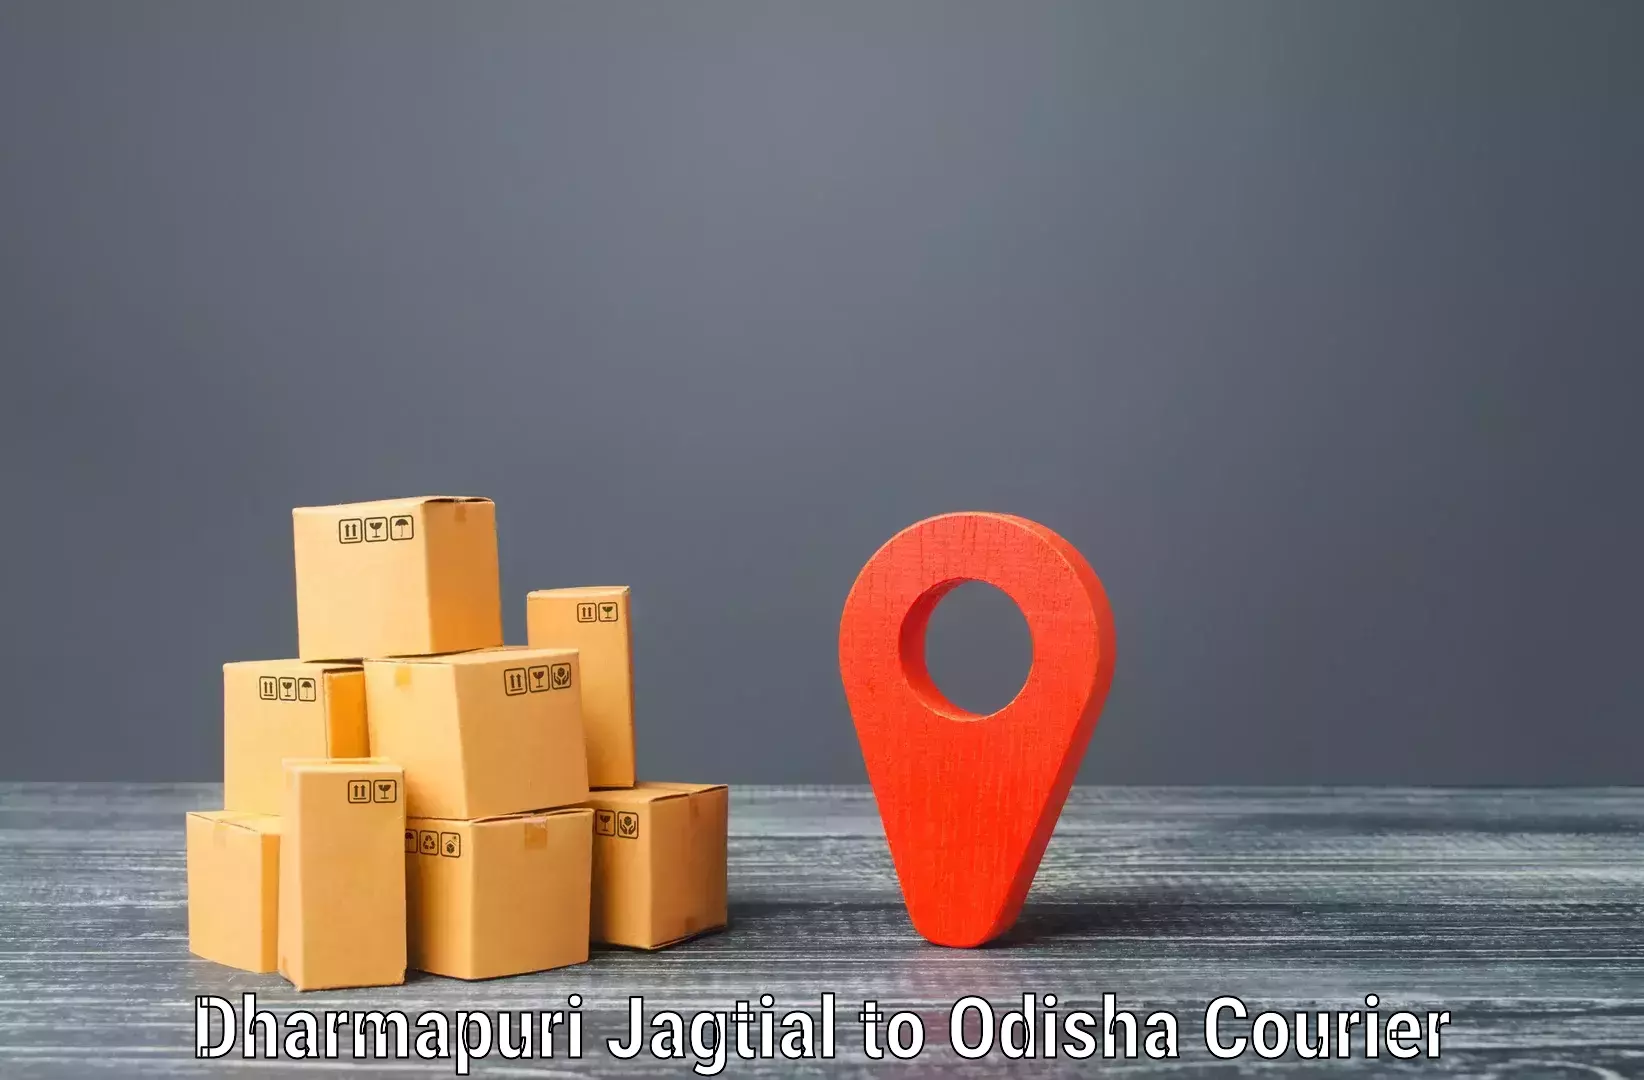 Fast shipping solutions Dharmapuri Jagtial to Chatrapur